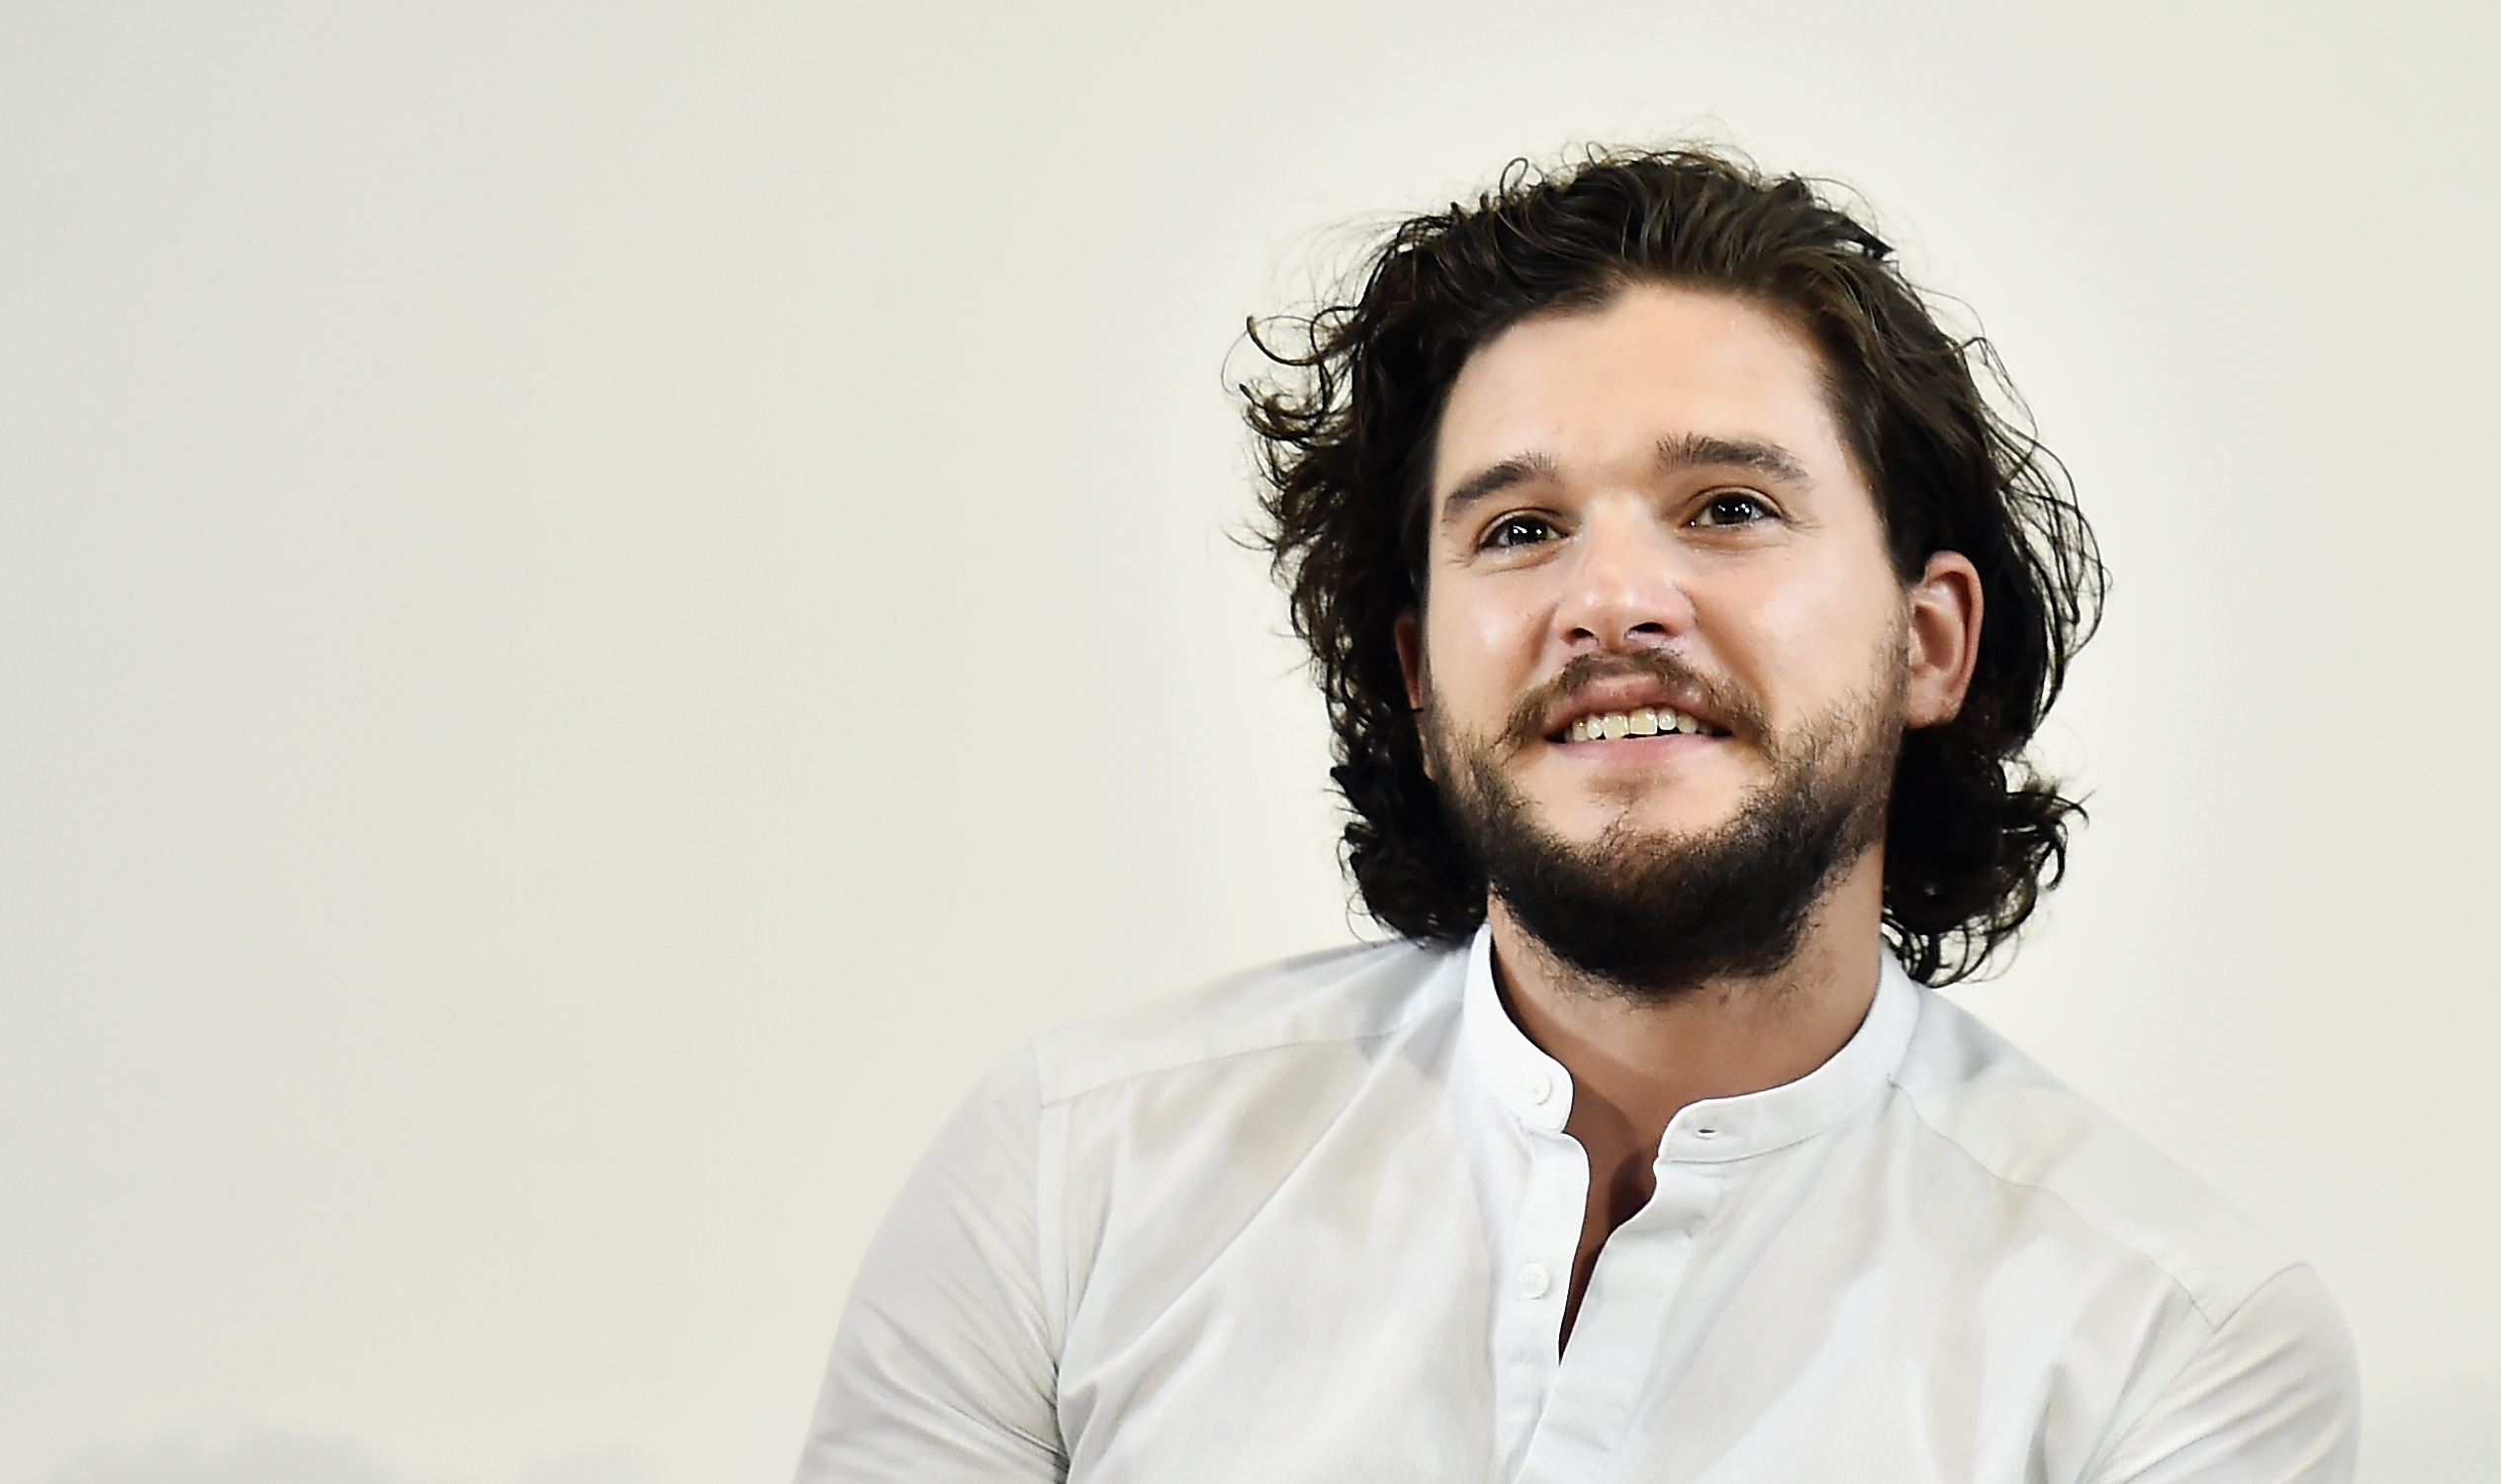 Kit Harington Haircut: See the Game of Thrones Star With Short Hair!